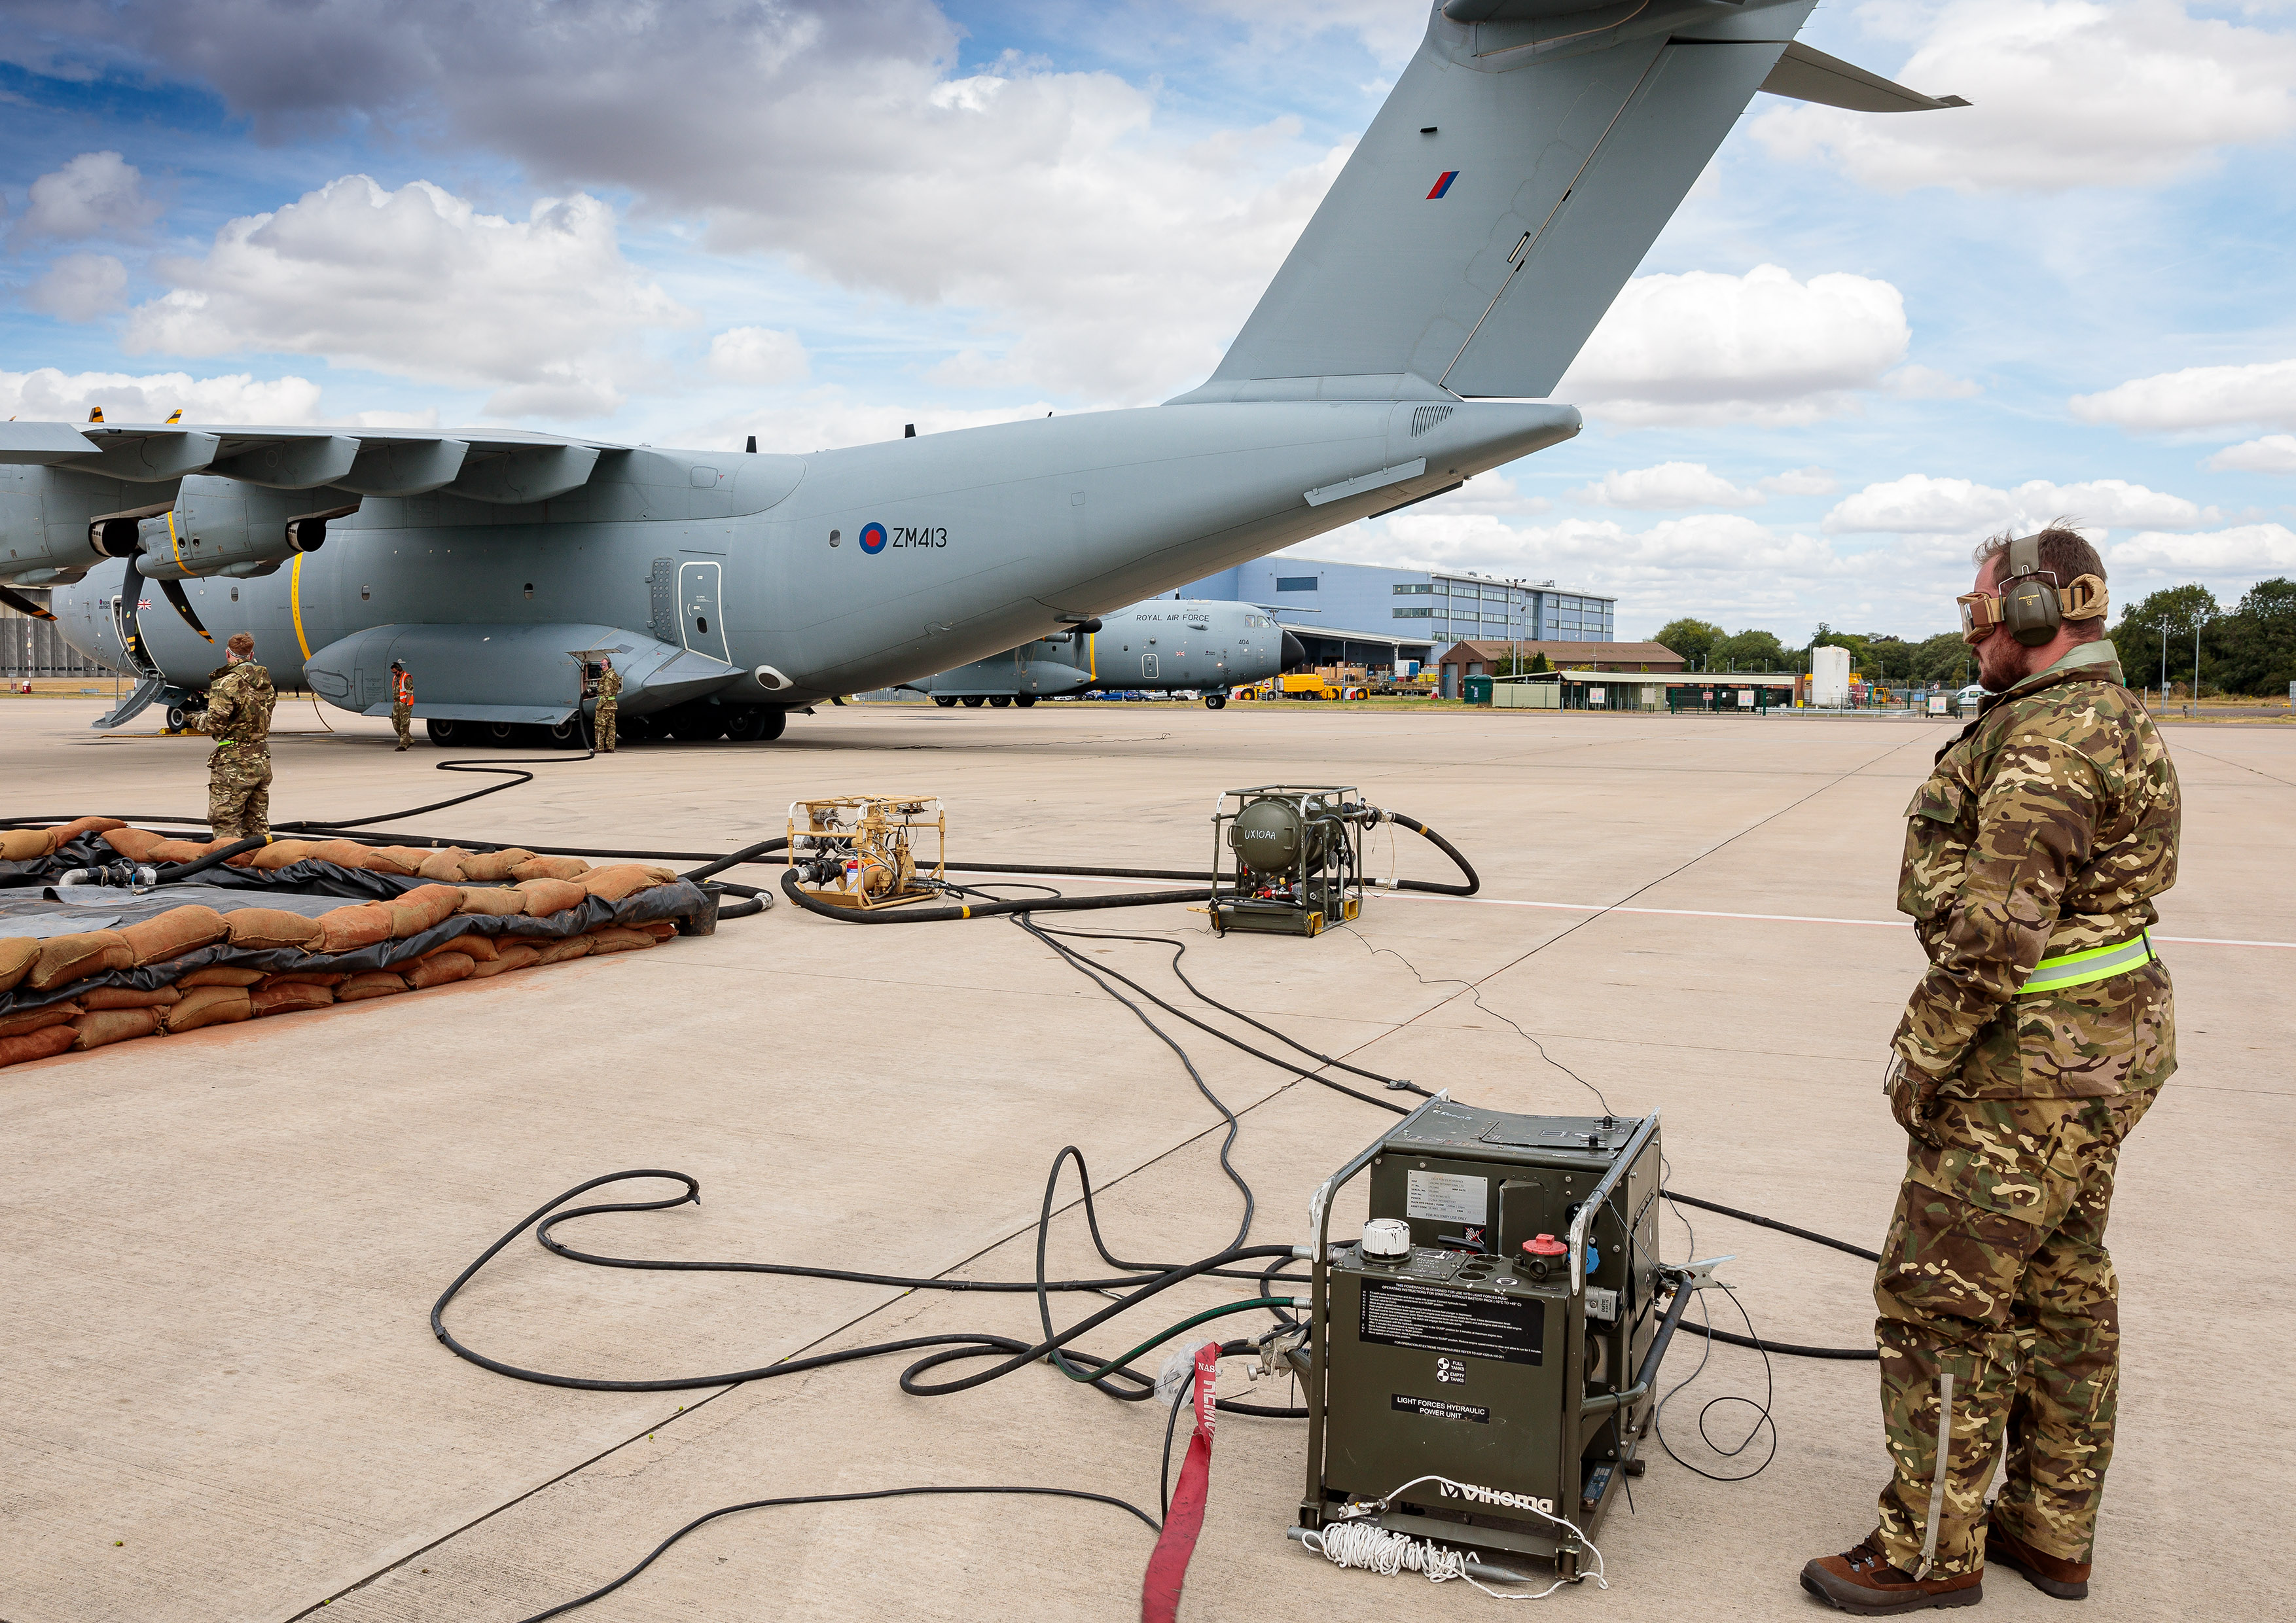 Image shows RAF aviators standing by spill kit barrier and refuelling equipment with Hercules aircraft in background. 